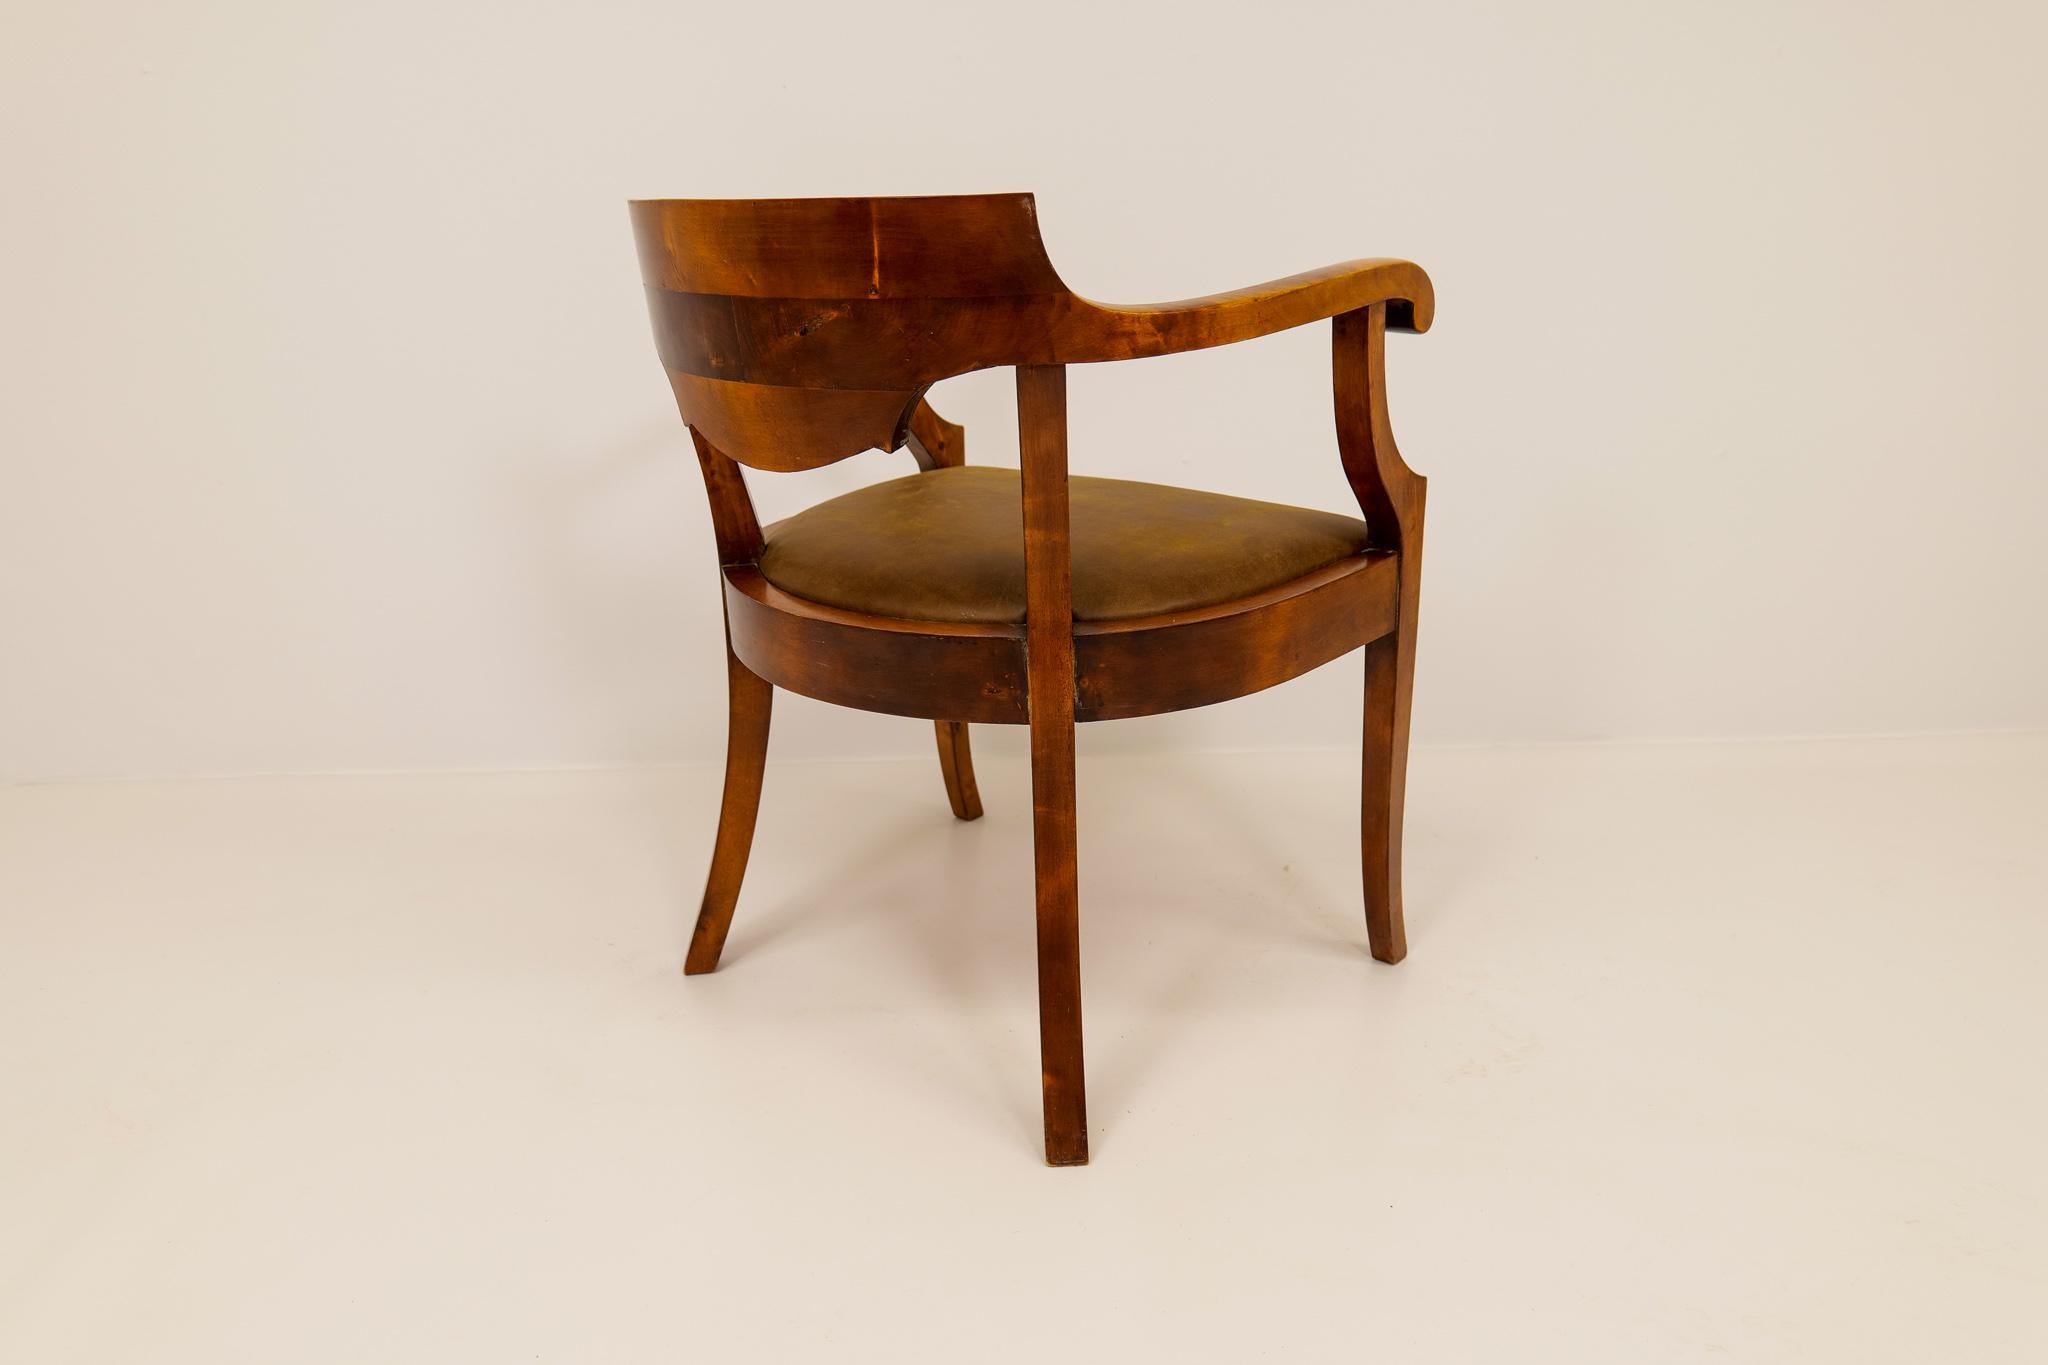 Swedish Desk Chair Birch Lacquered Mahogany Brown Sweden 1920s For Sale 6